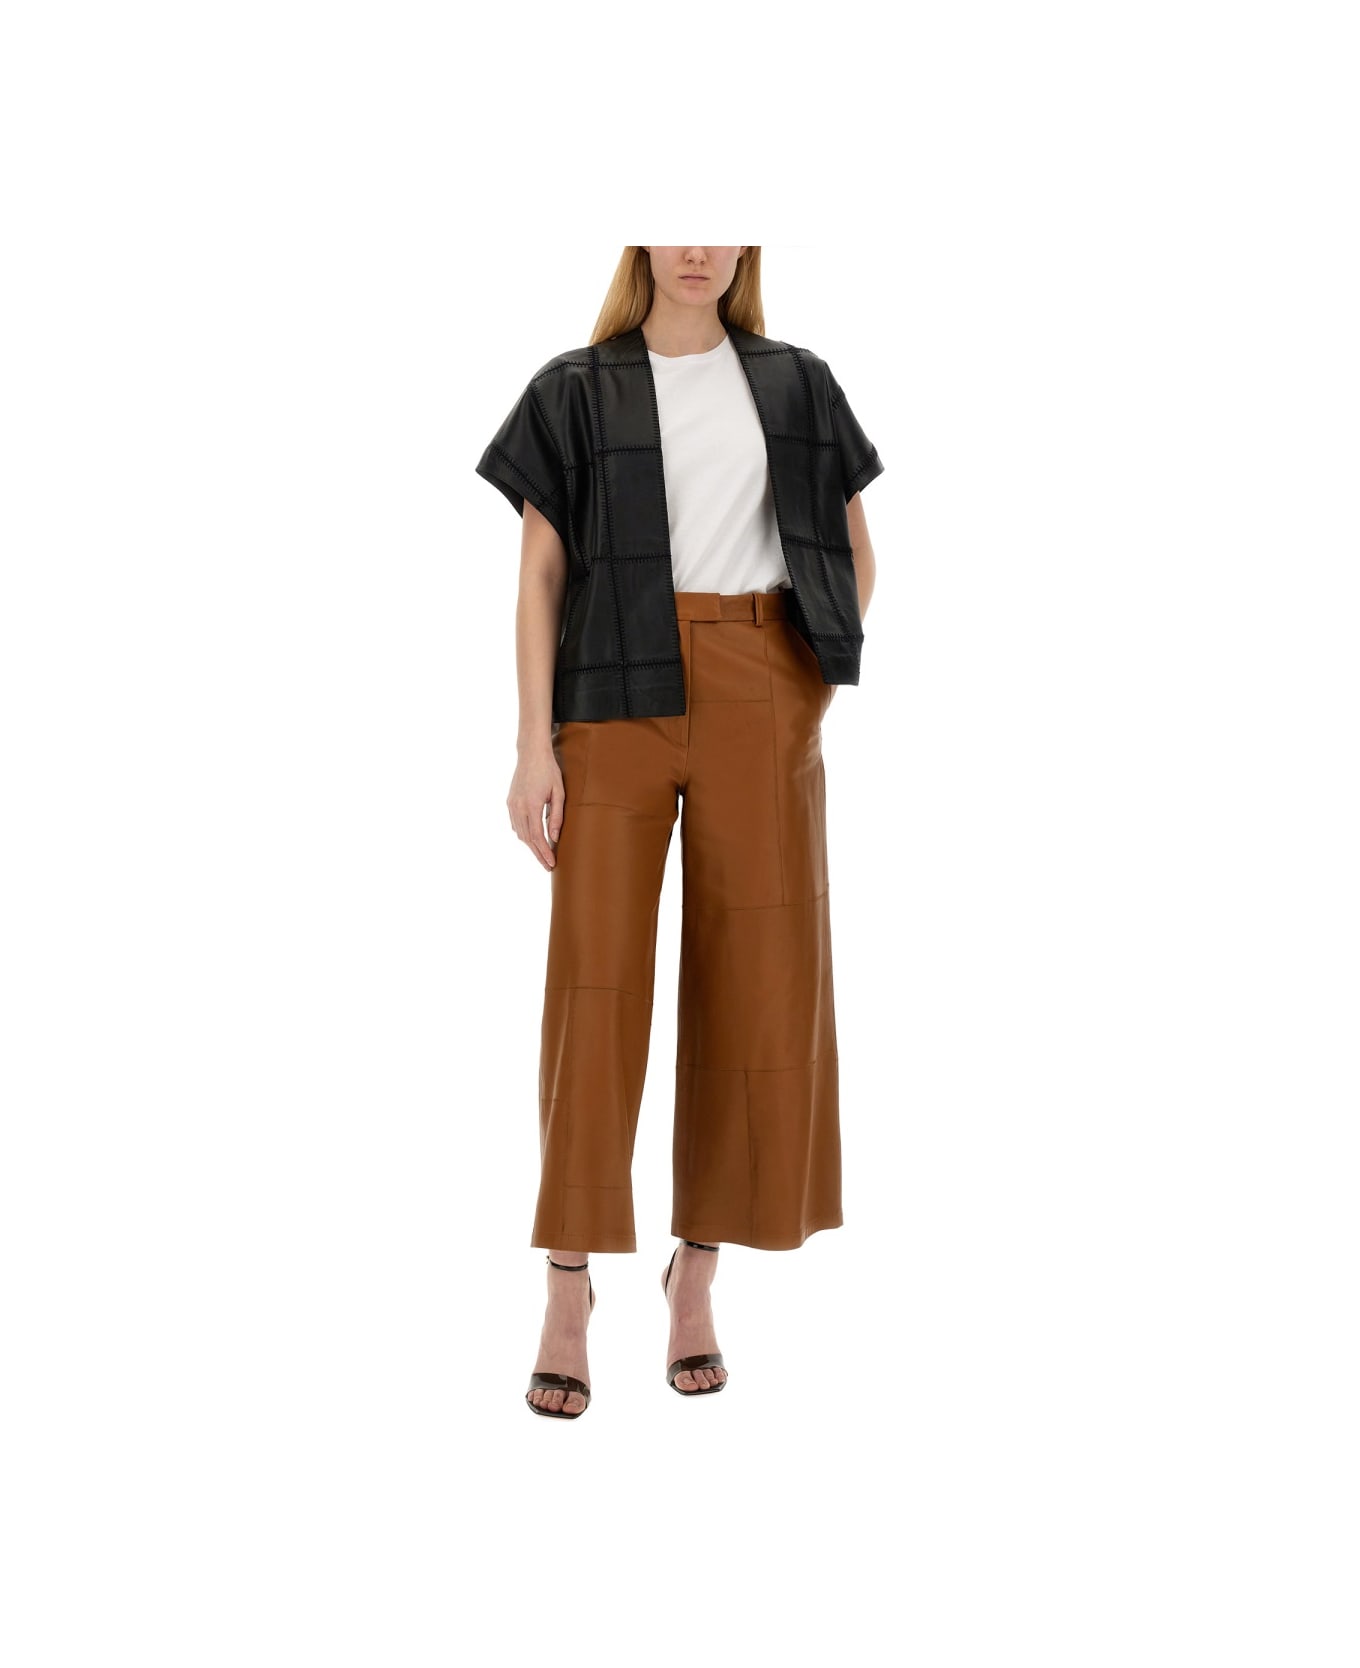 Alysi Patch Pants - Leather Brown ボトムス